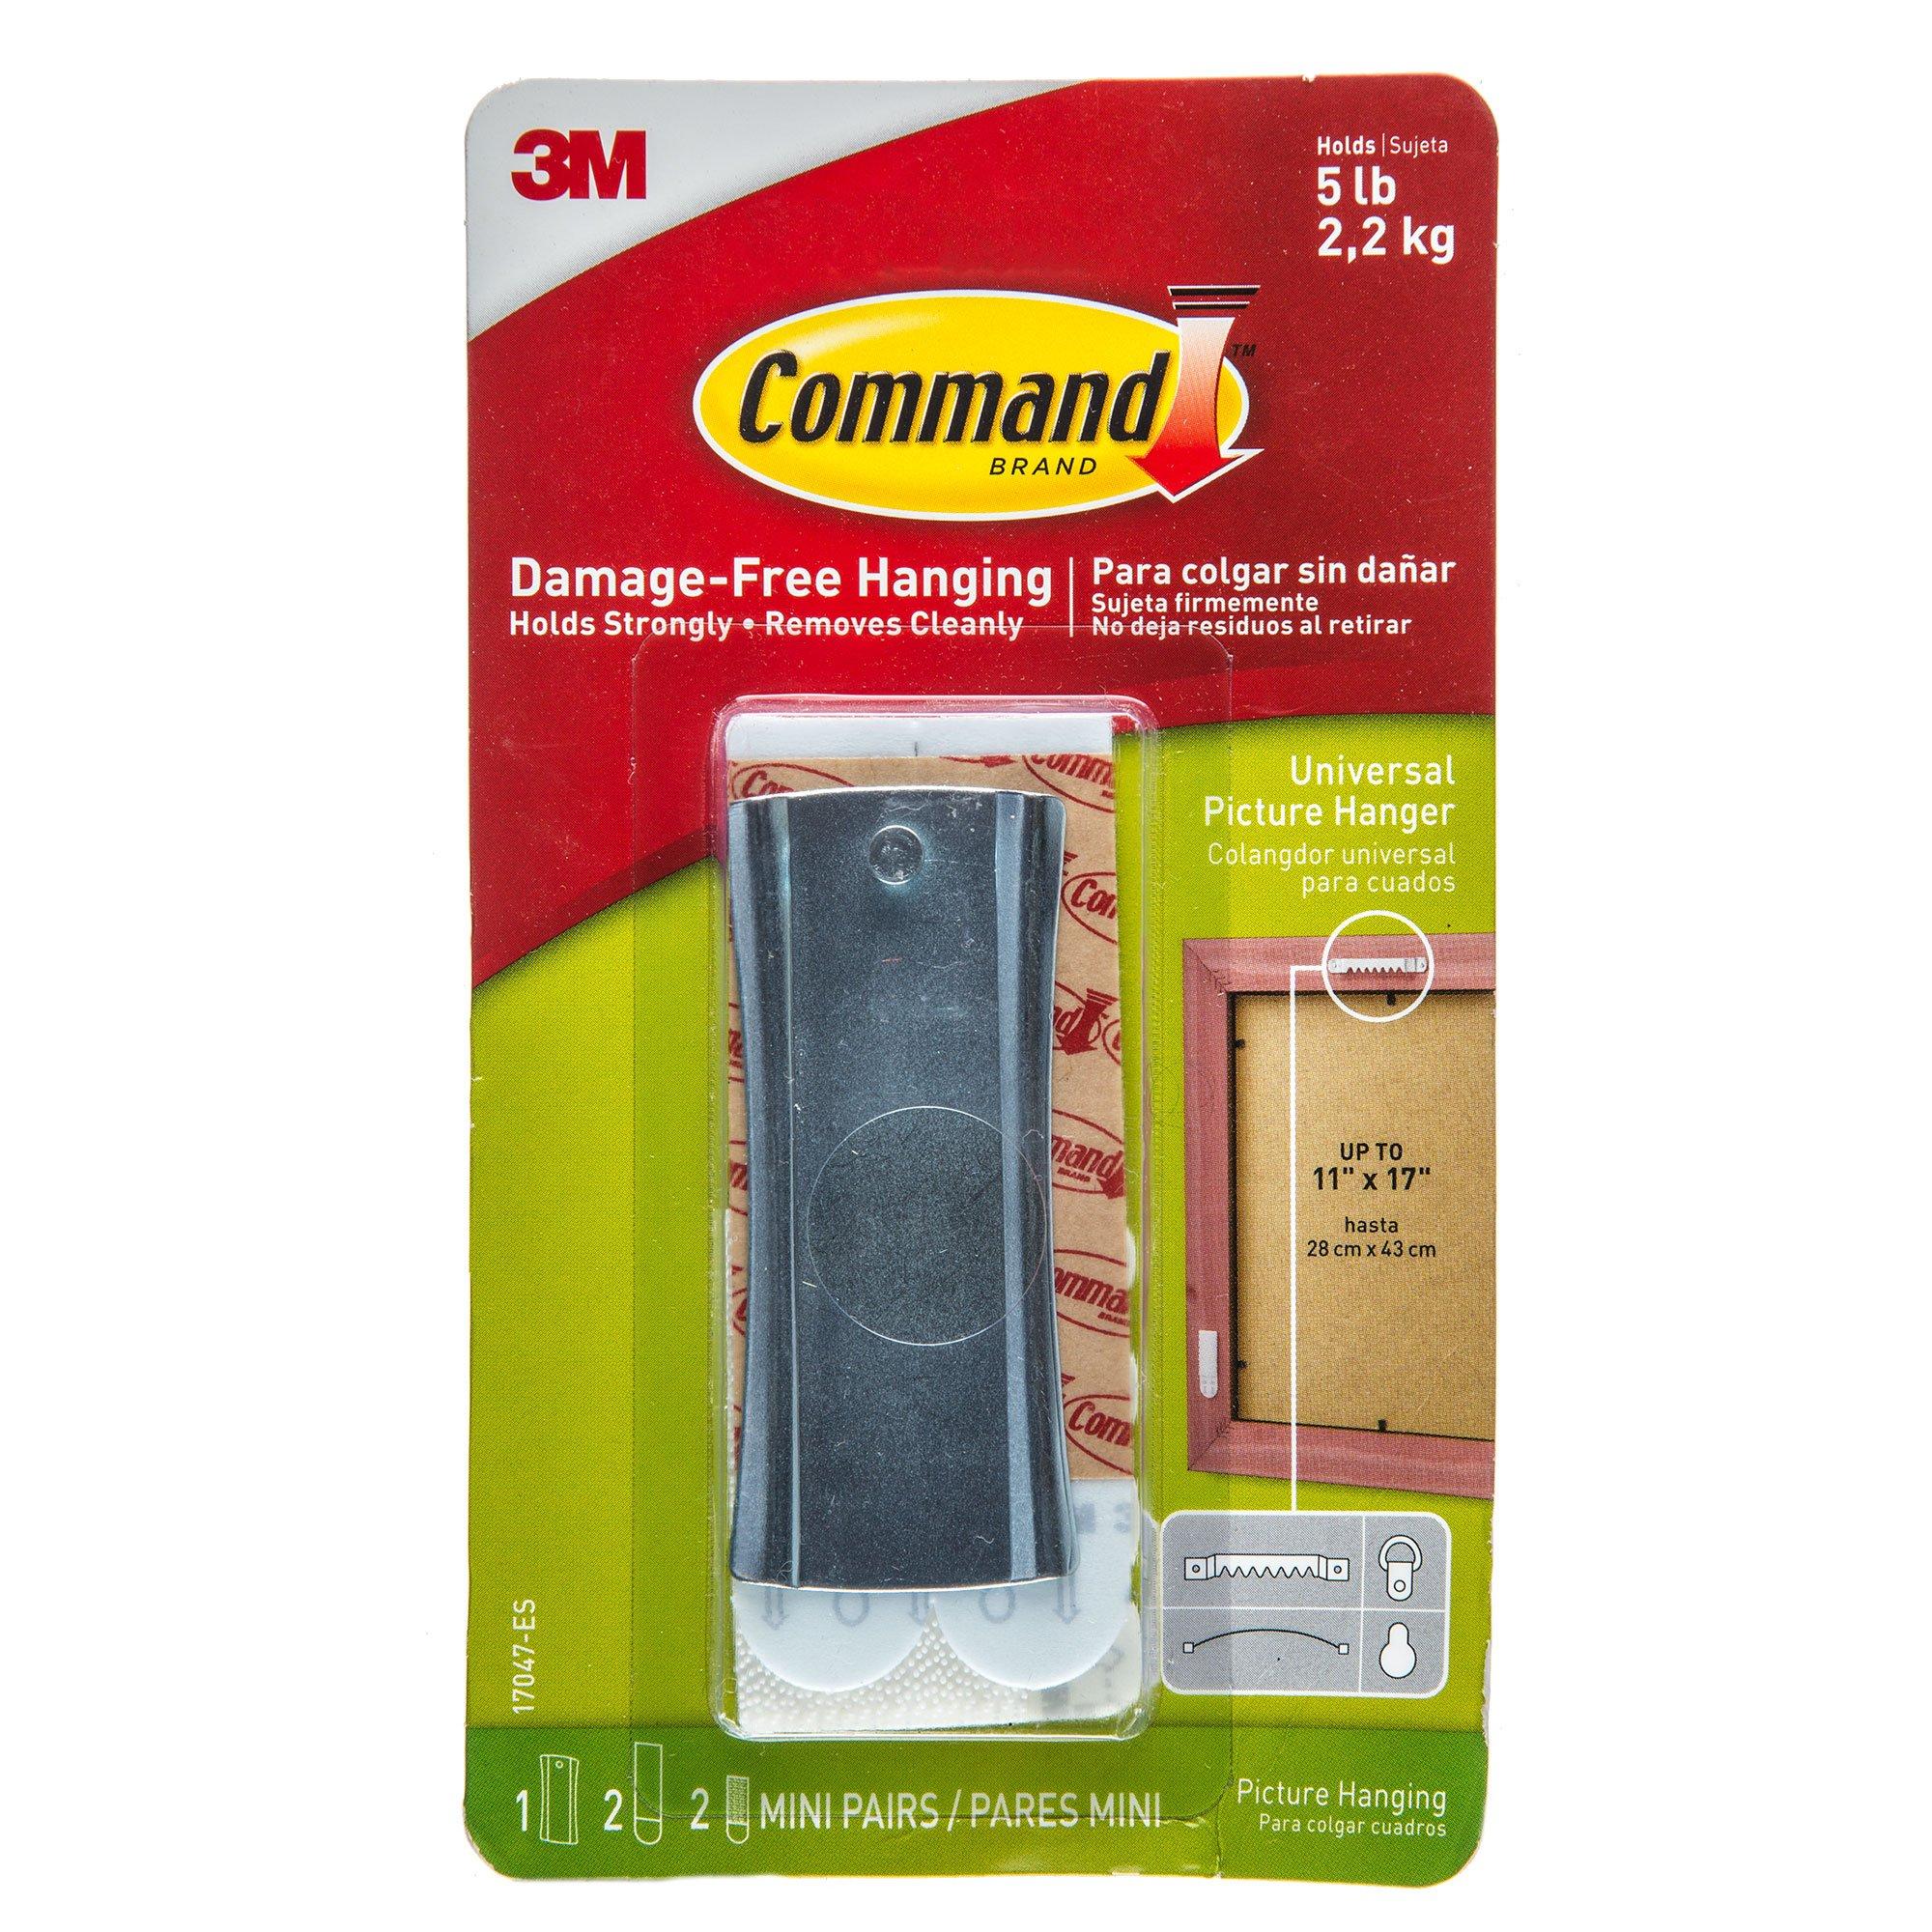 Command Picture Hanging Clips Value Pack - Extra Large, Hobby Lobby